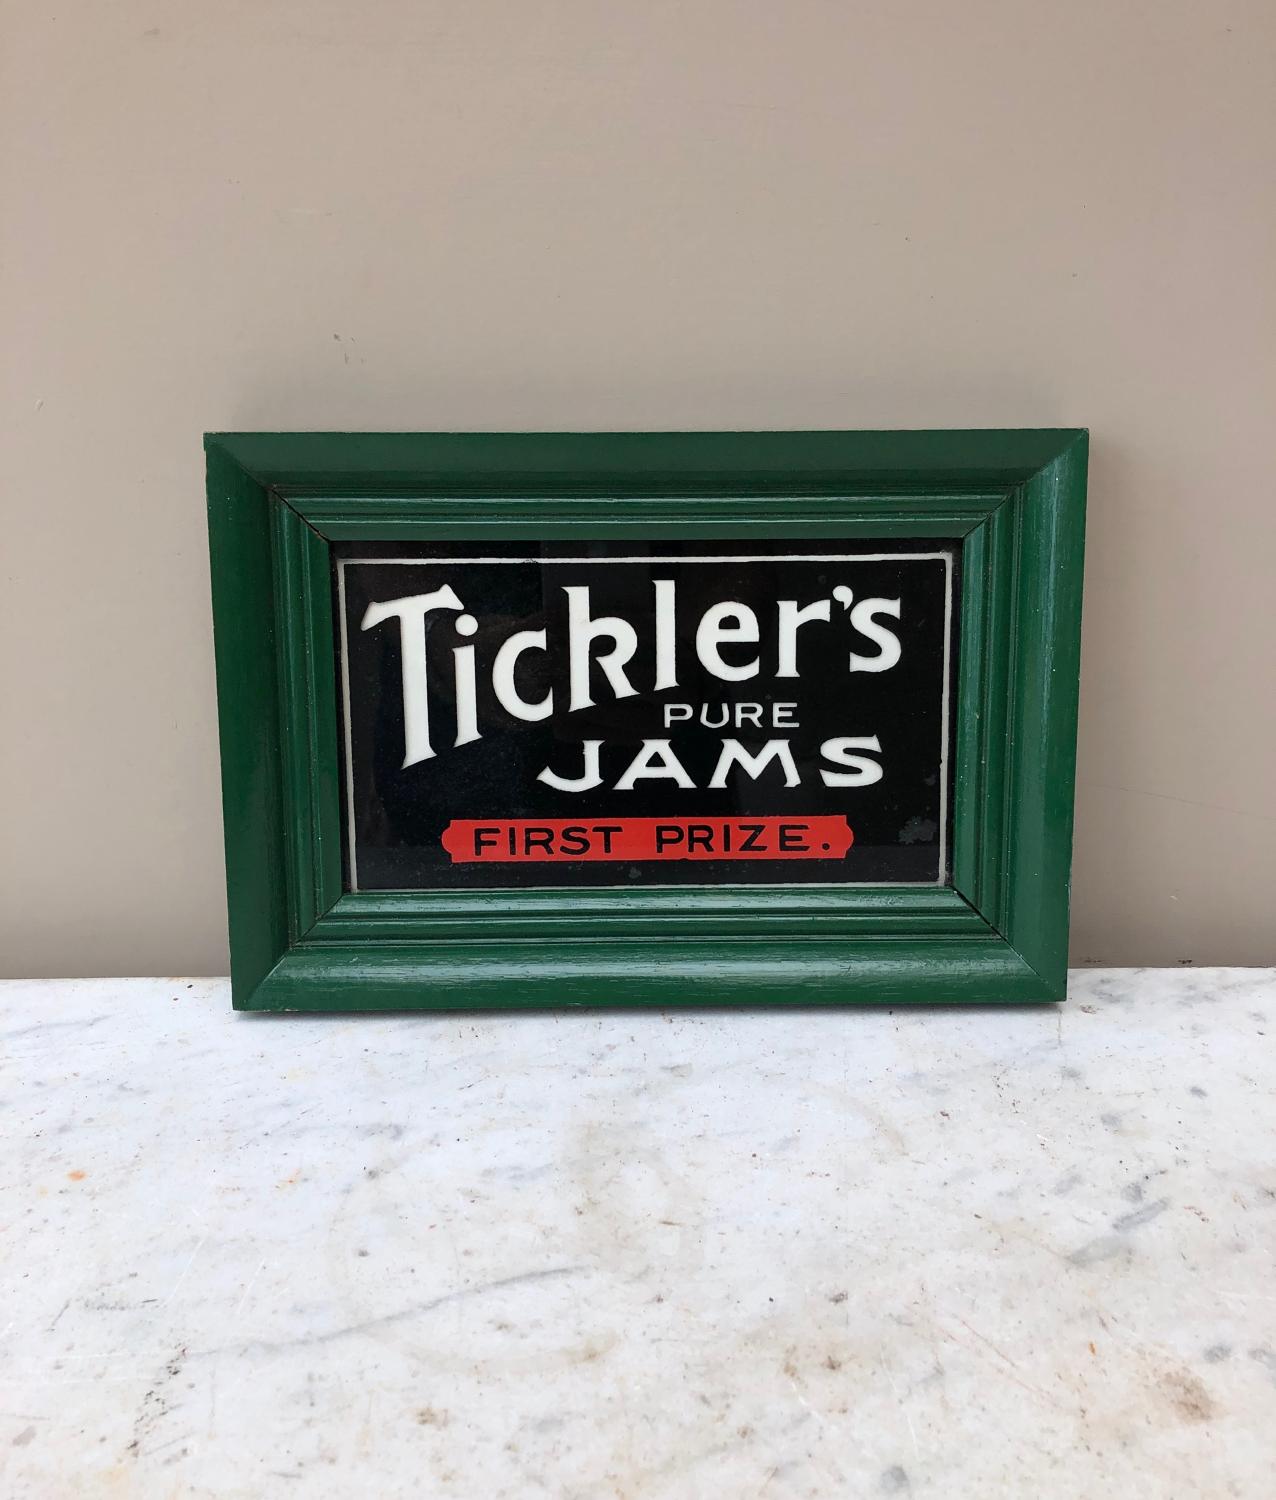 Early 20thC Reverse Painted Glass Advertising Sign - Ticklers Jam